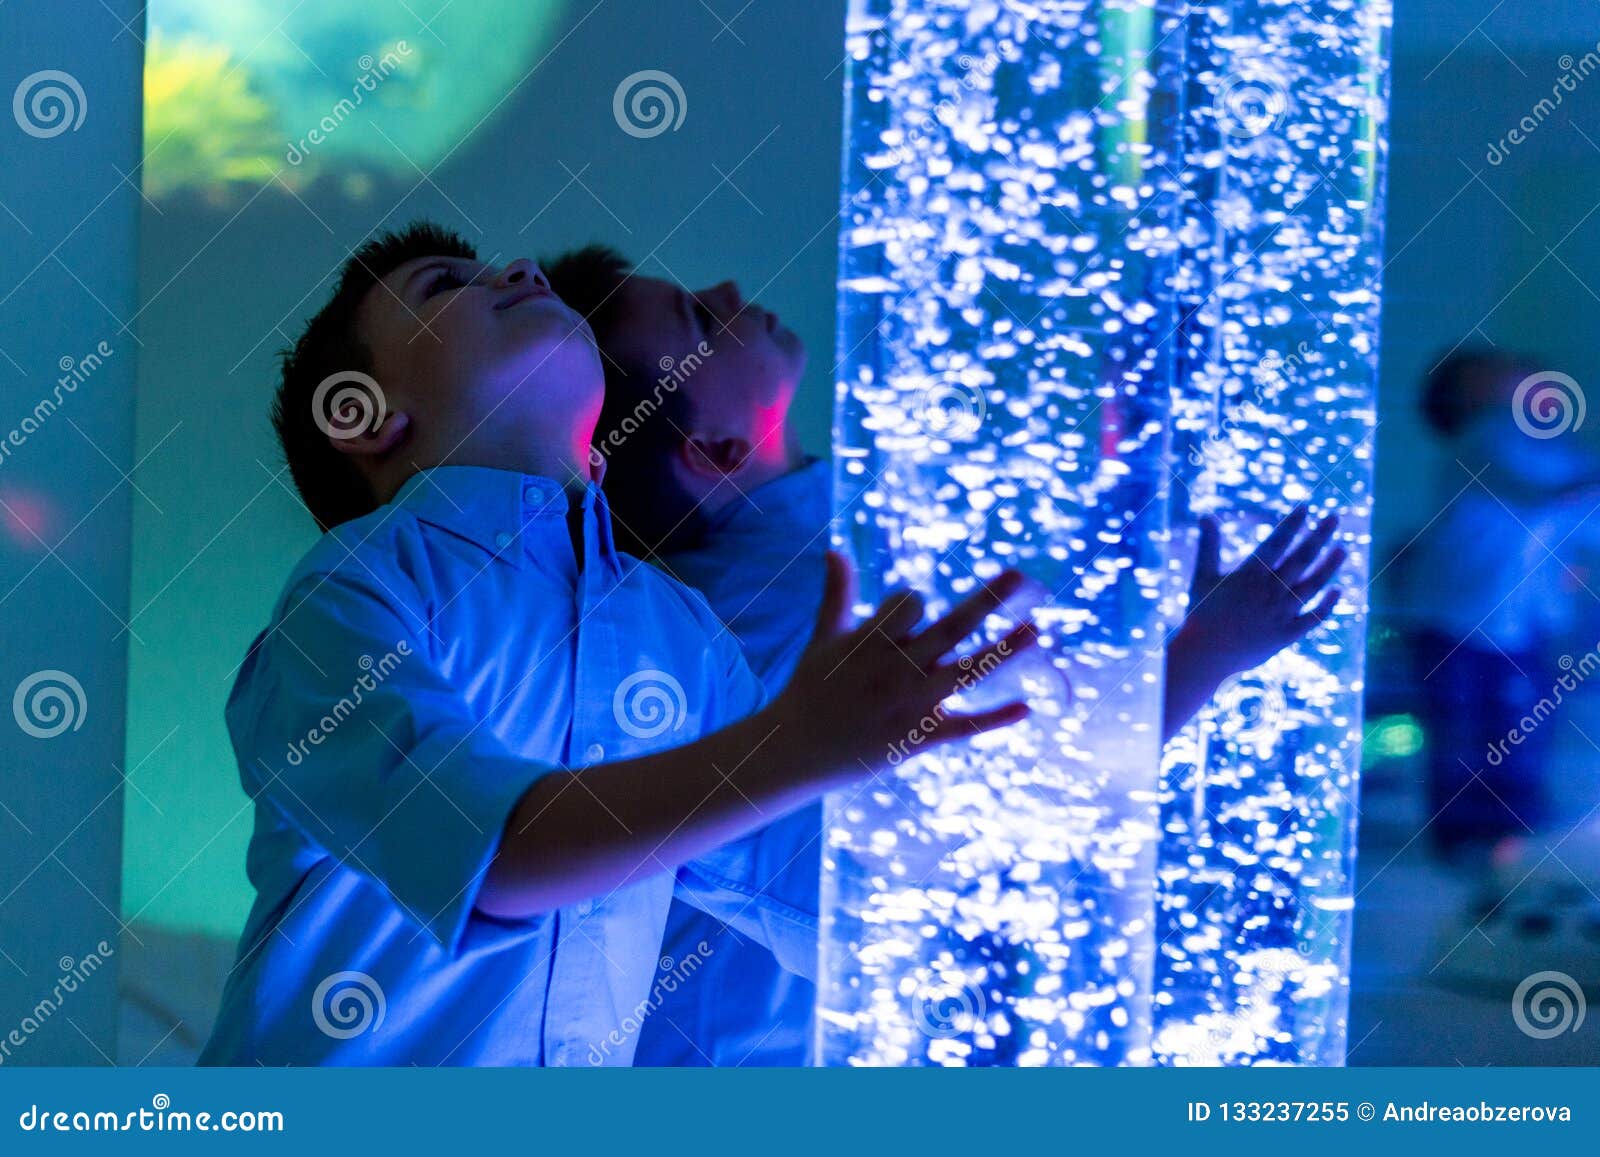 child in therapy sensory stimulating room, snoezelen. child interacting with colored lights bubble tube lamp during therapy.